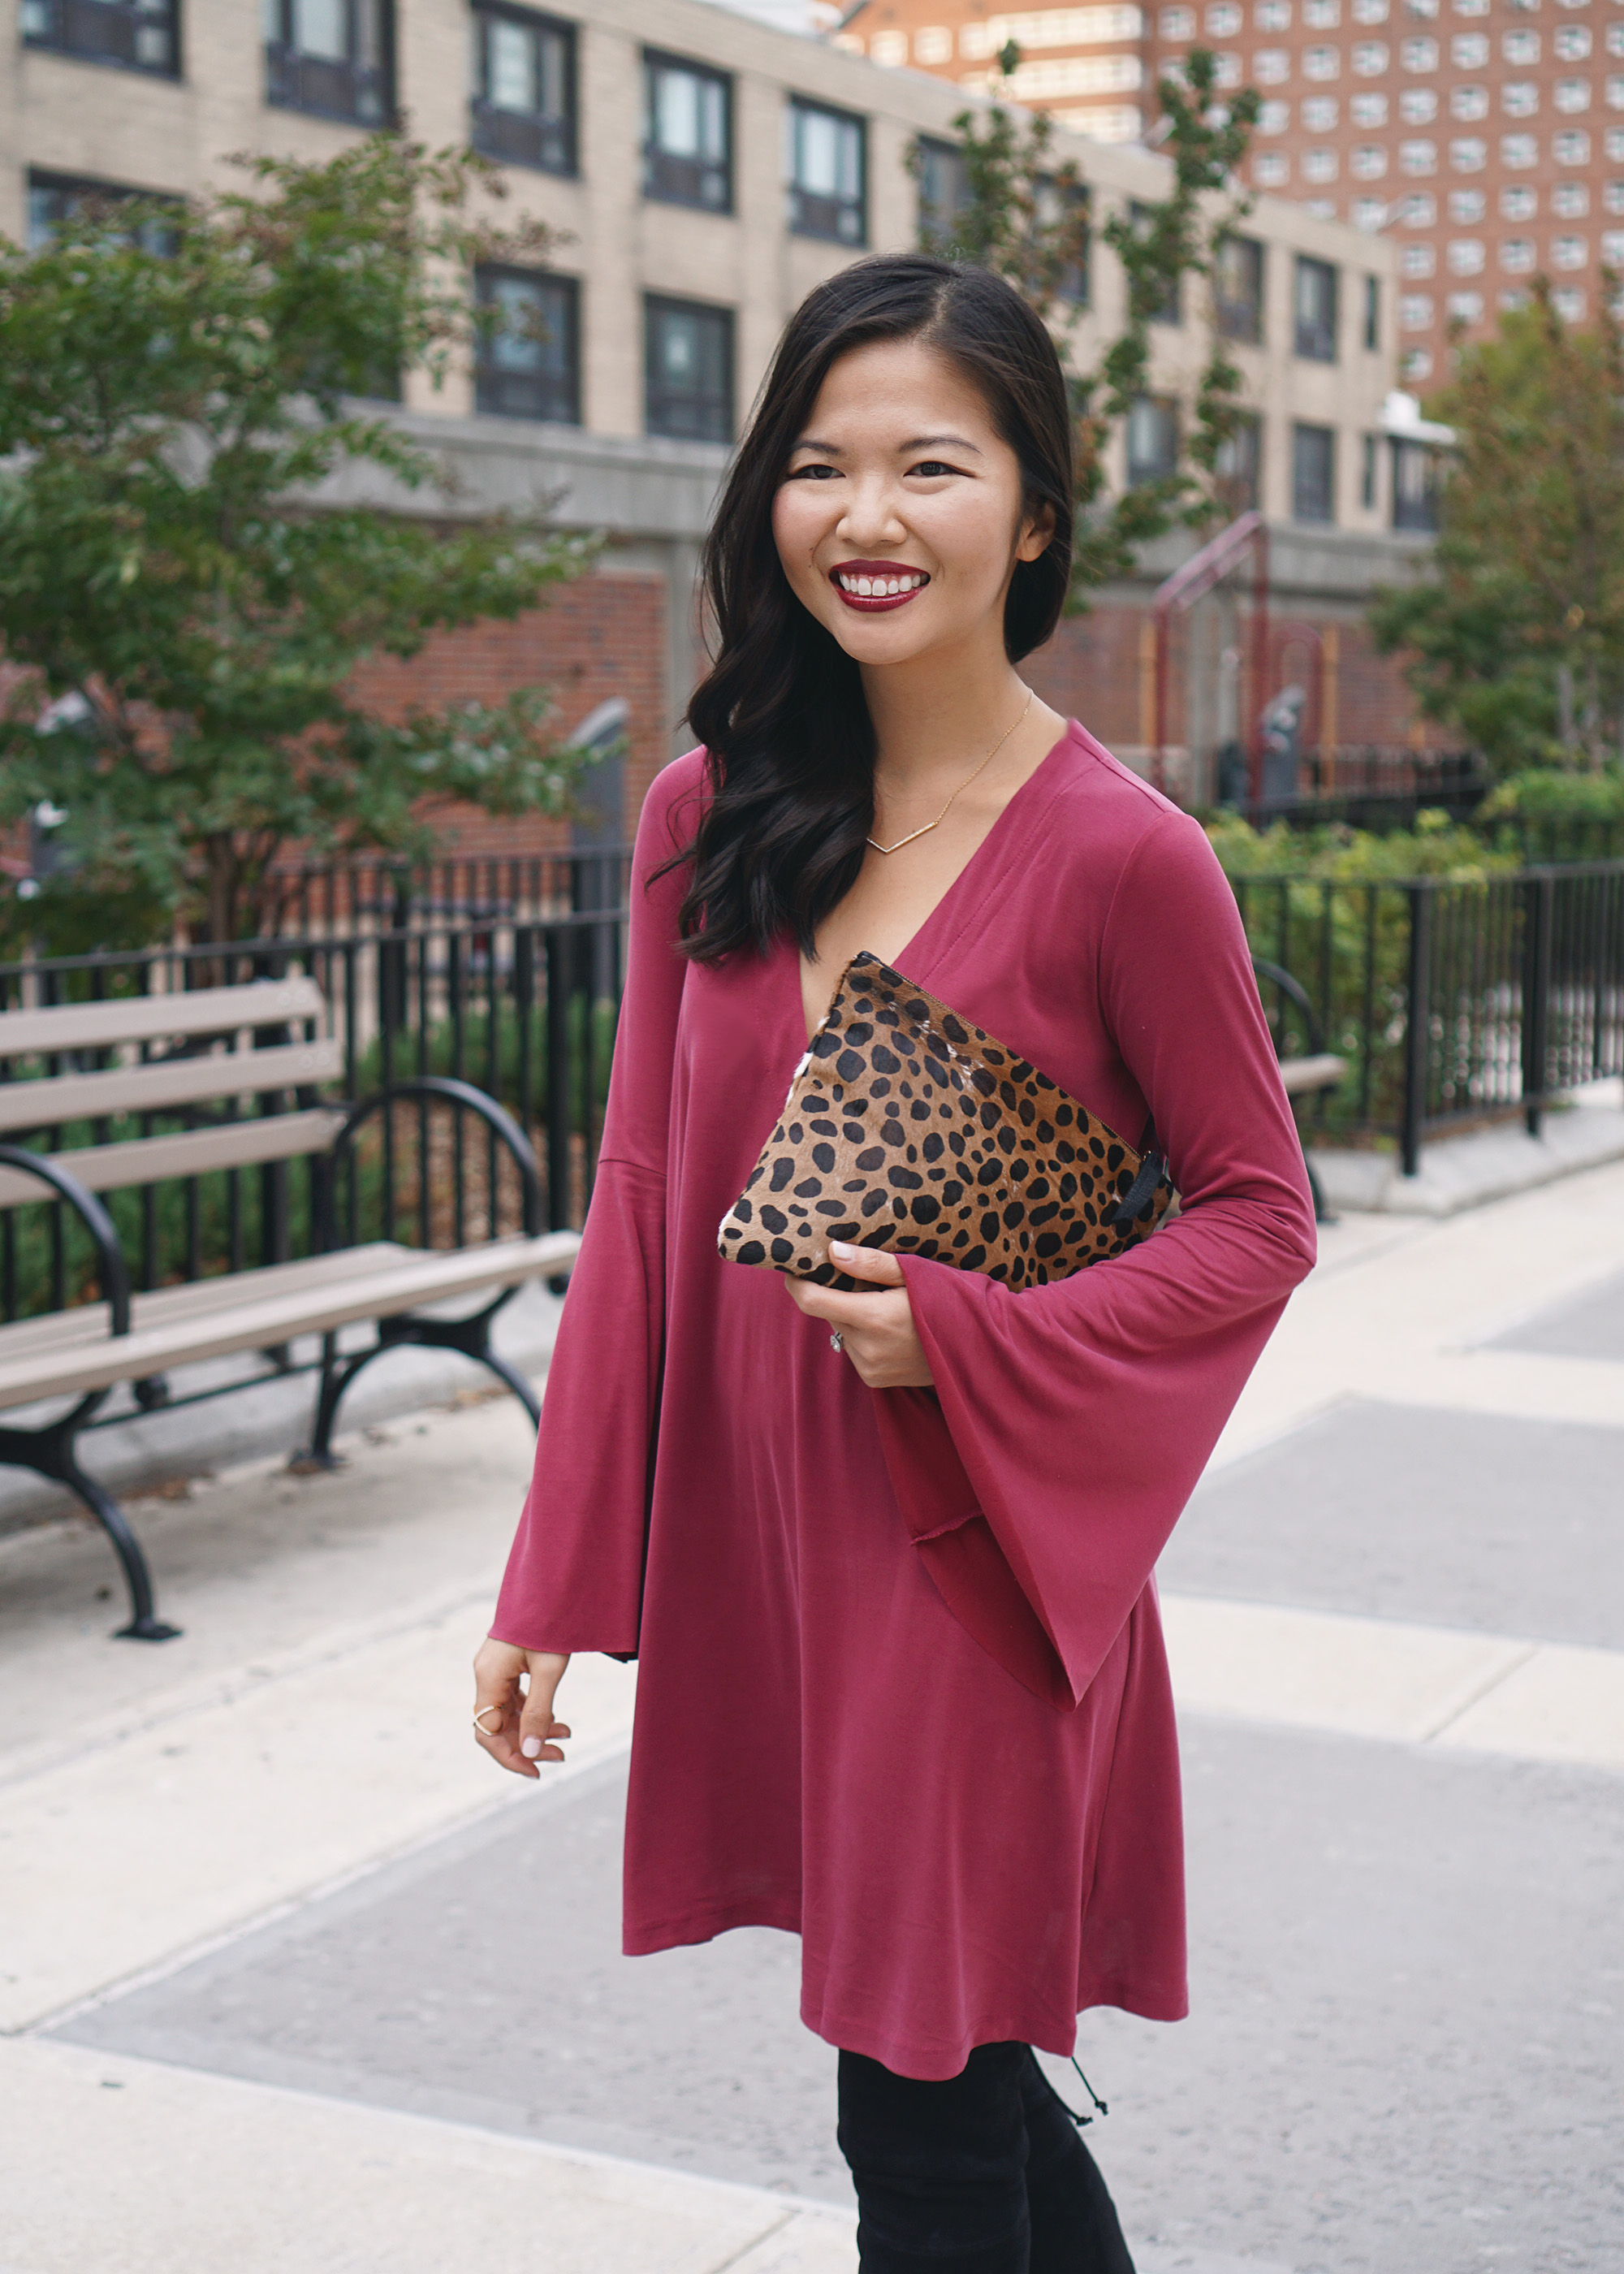 Fall's Biggest Trend: Bell Sleeves